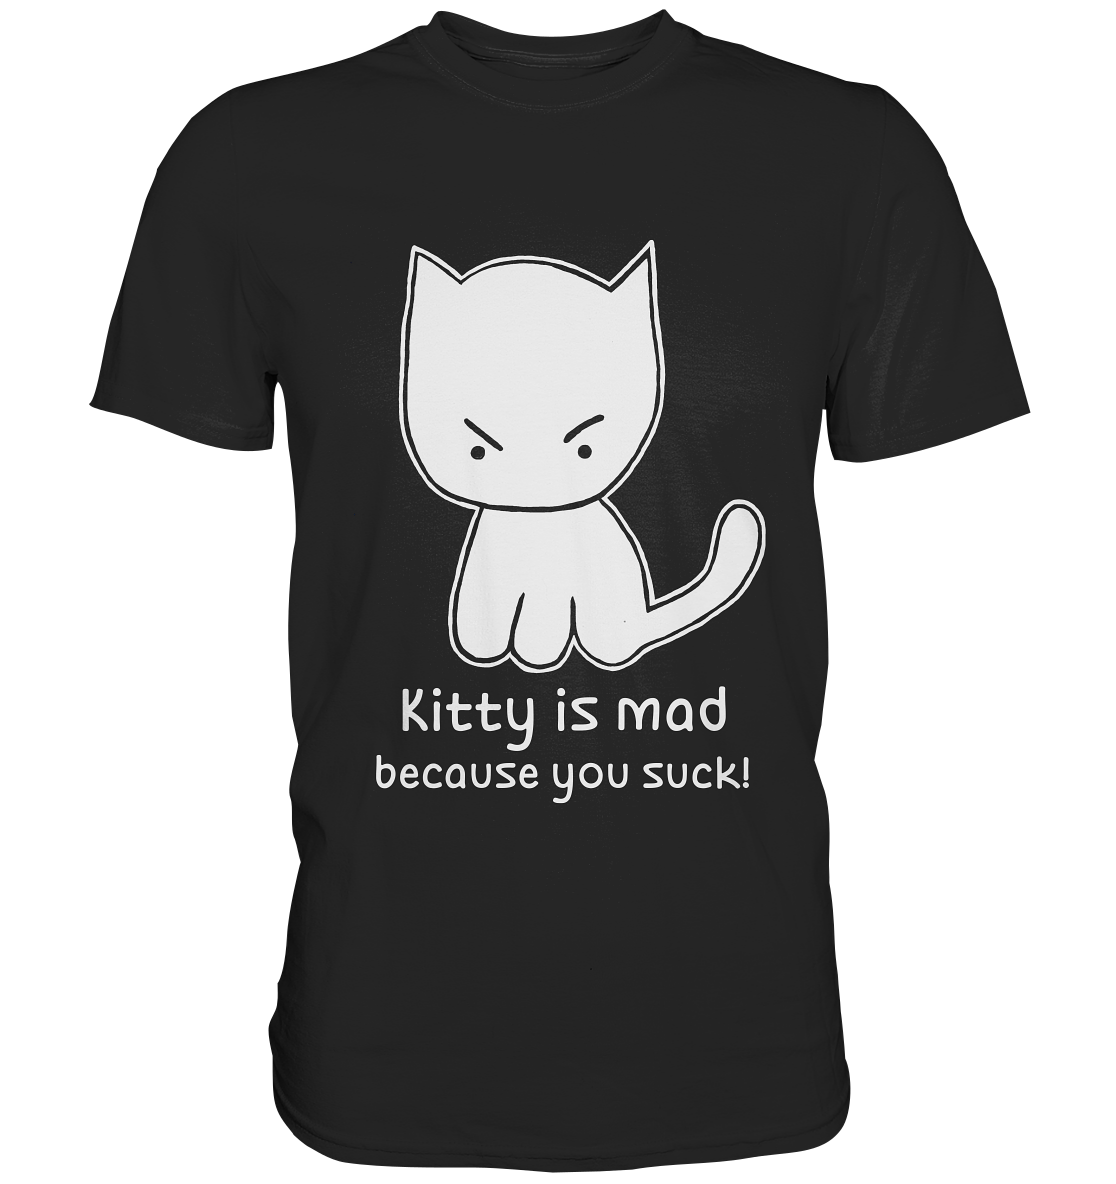 Kitty is mad because you suck. - Premium Shirt